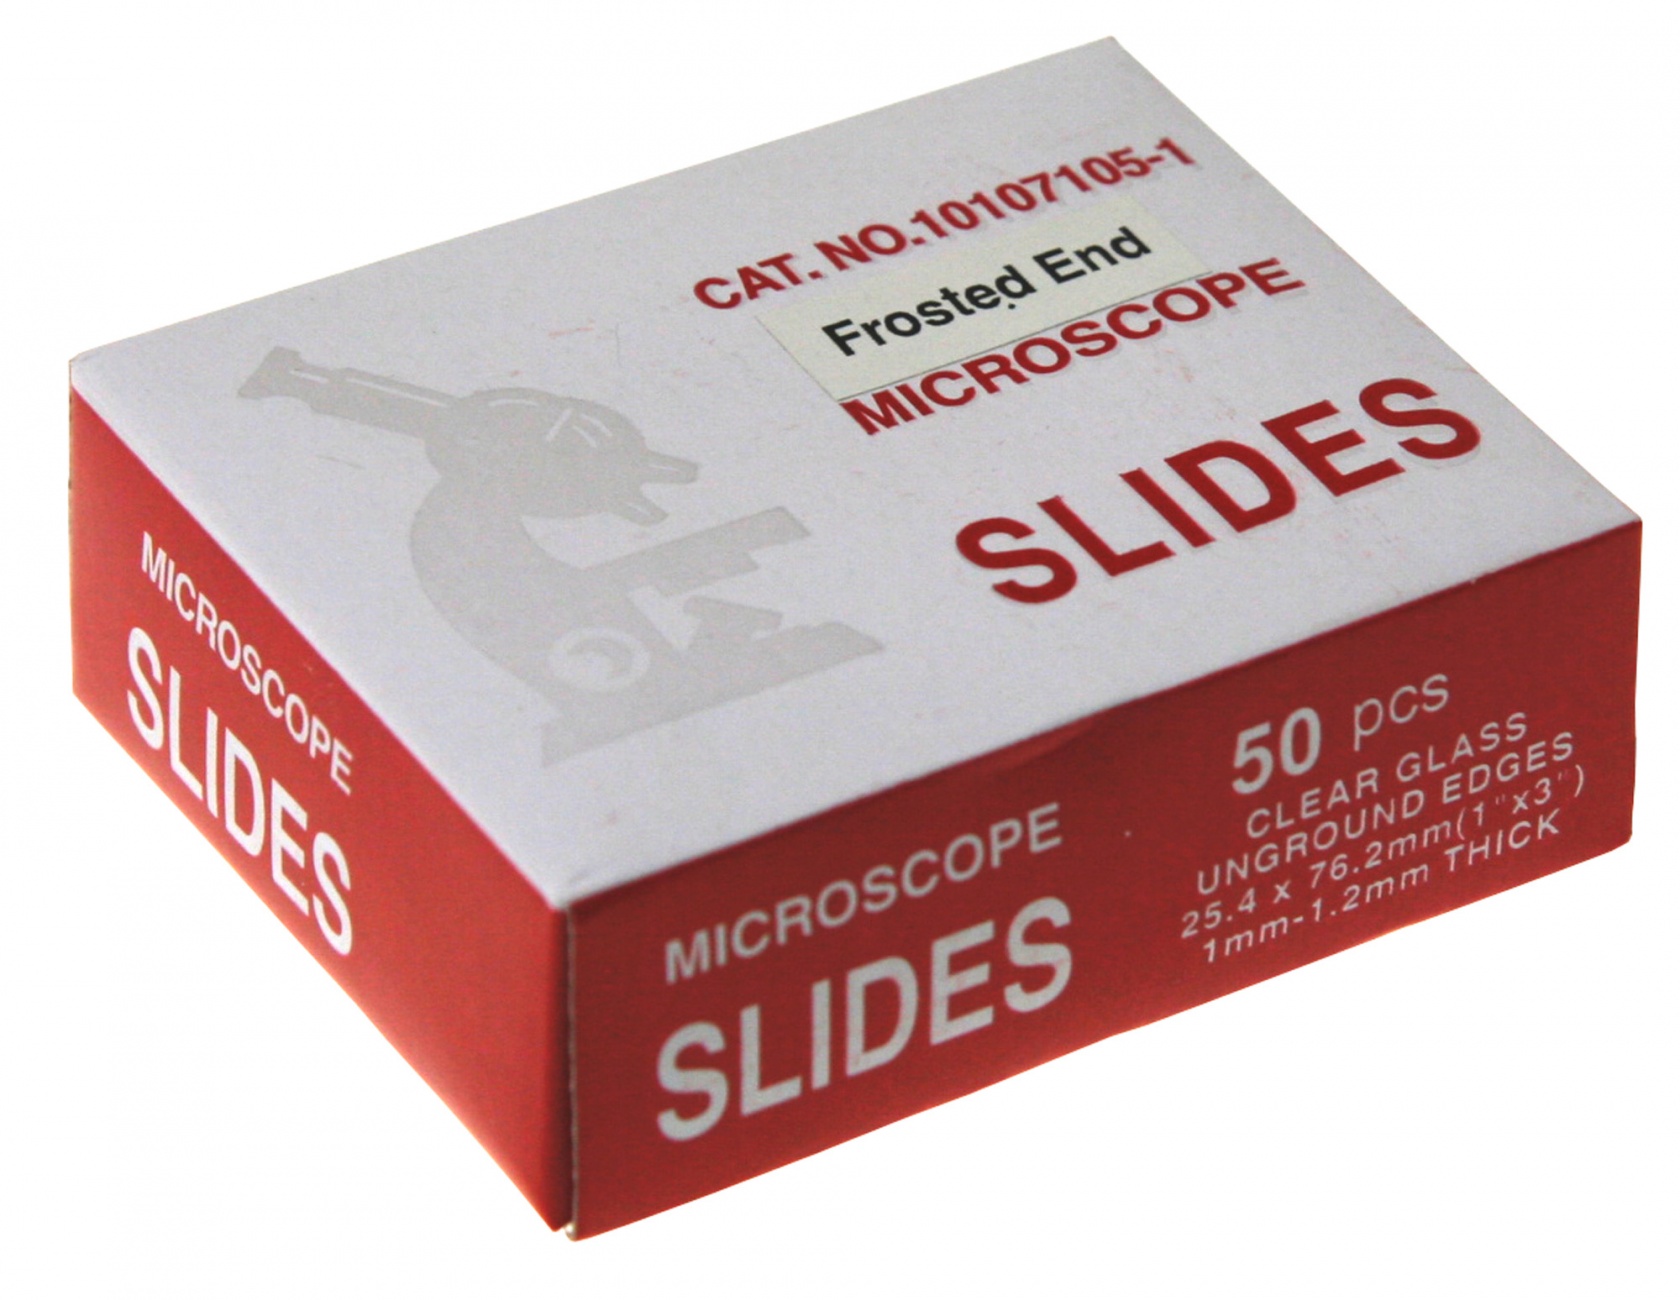 Microscope Slides Cut Edge Frosted Pk 50 image 0